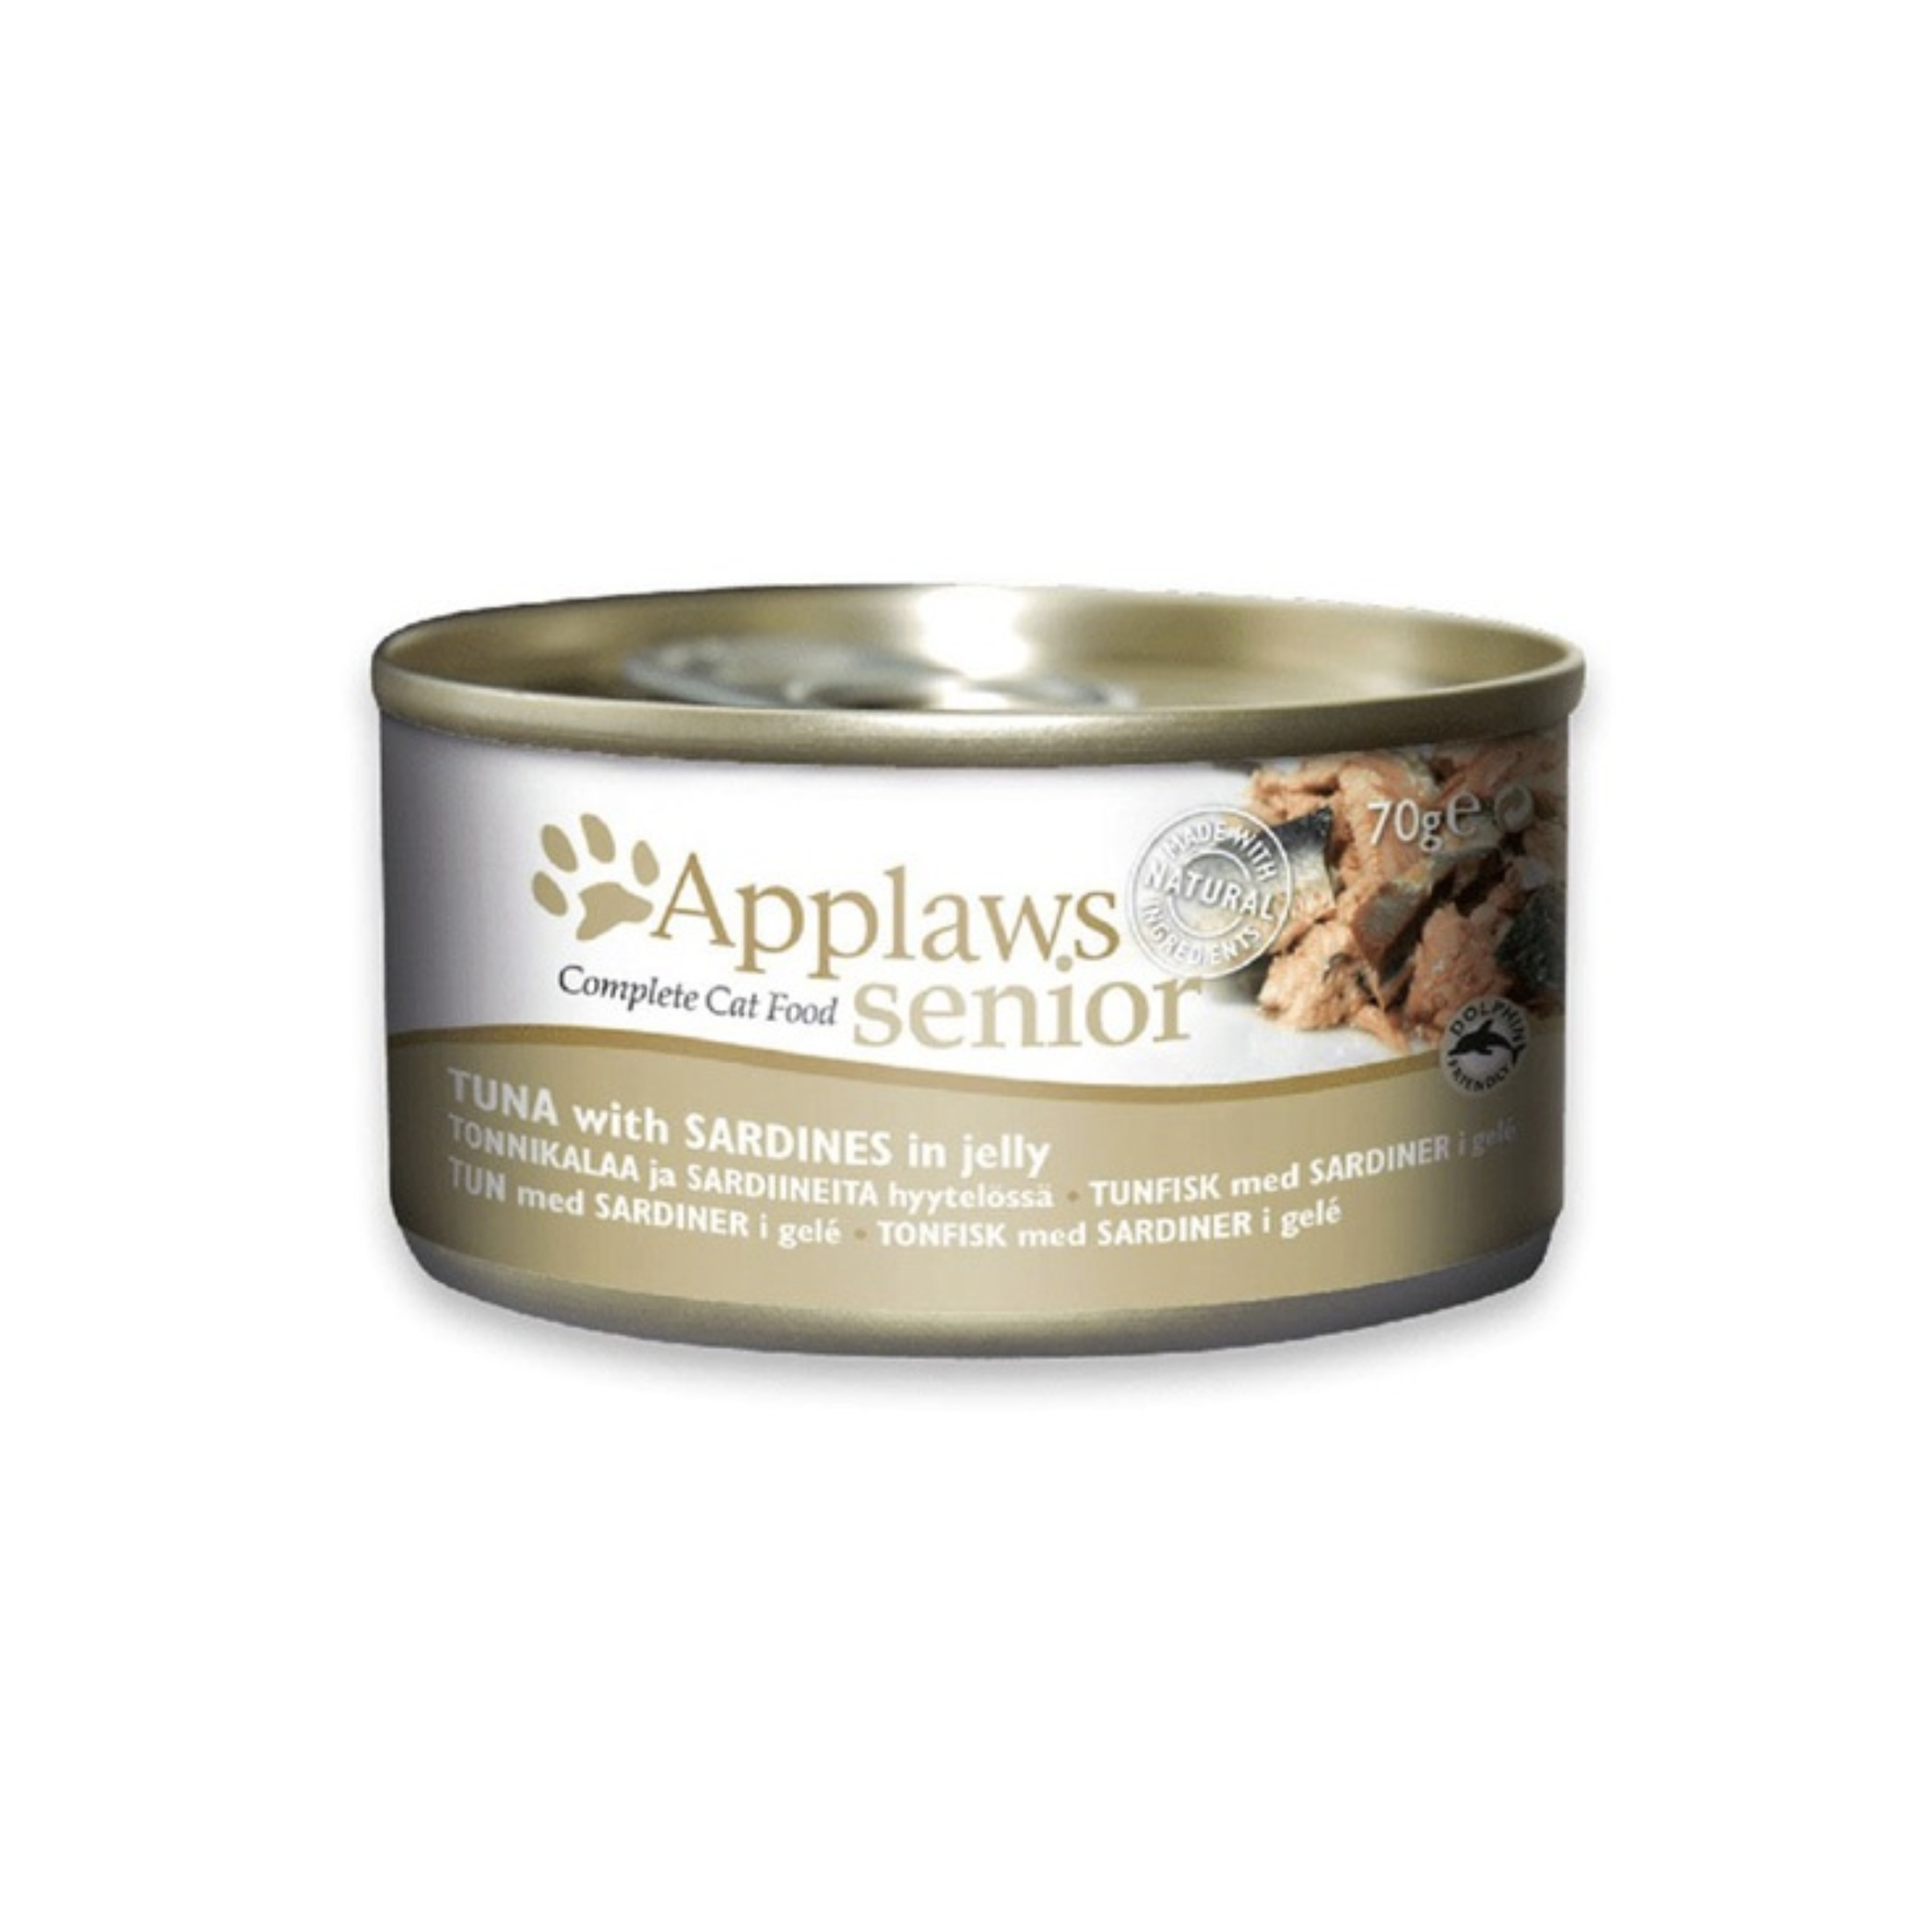 Applaws Senior Cat Wet Food - Tuna with Sardine in Jelly, High Protein, Grain Free, 70 g